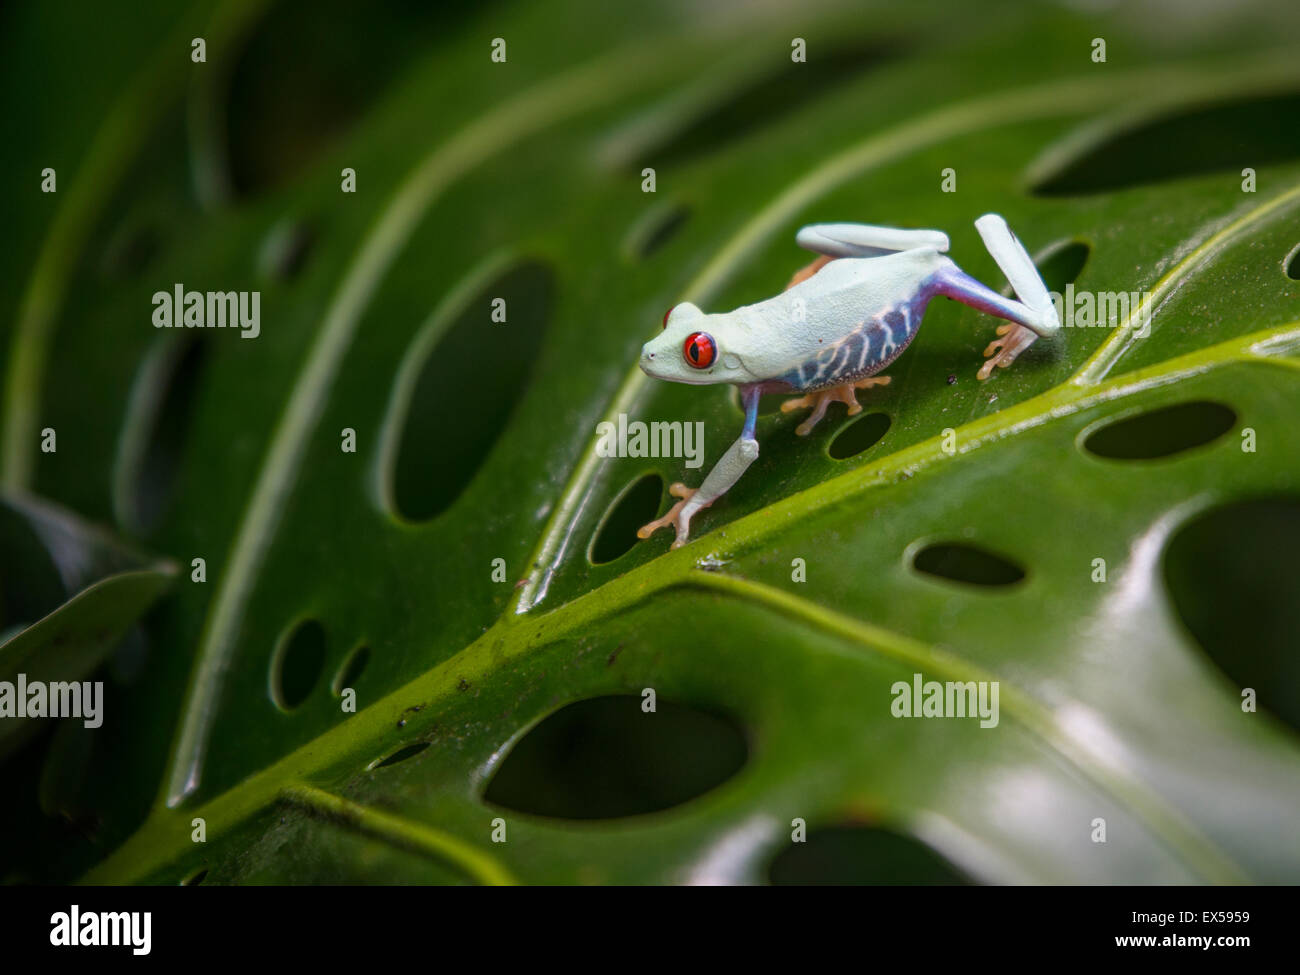 tropical background with frog Stock Photo